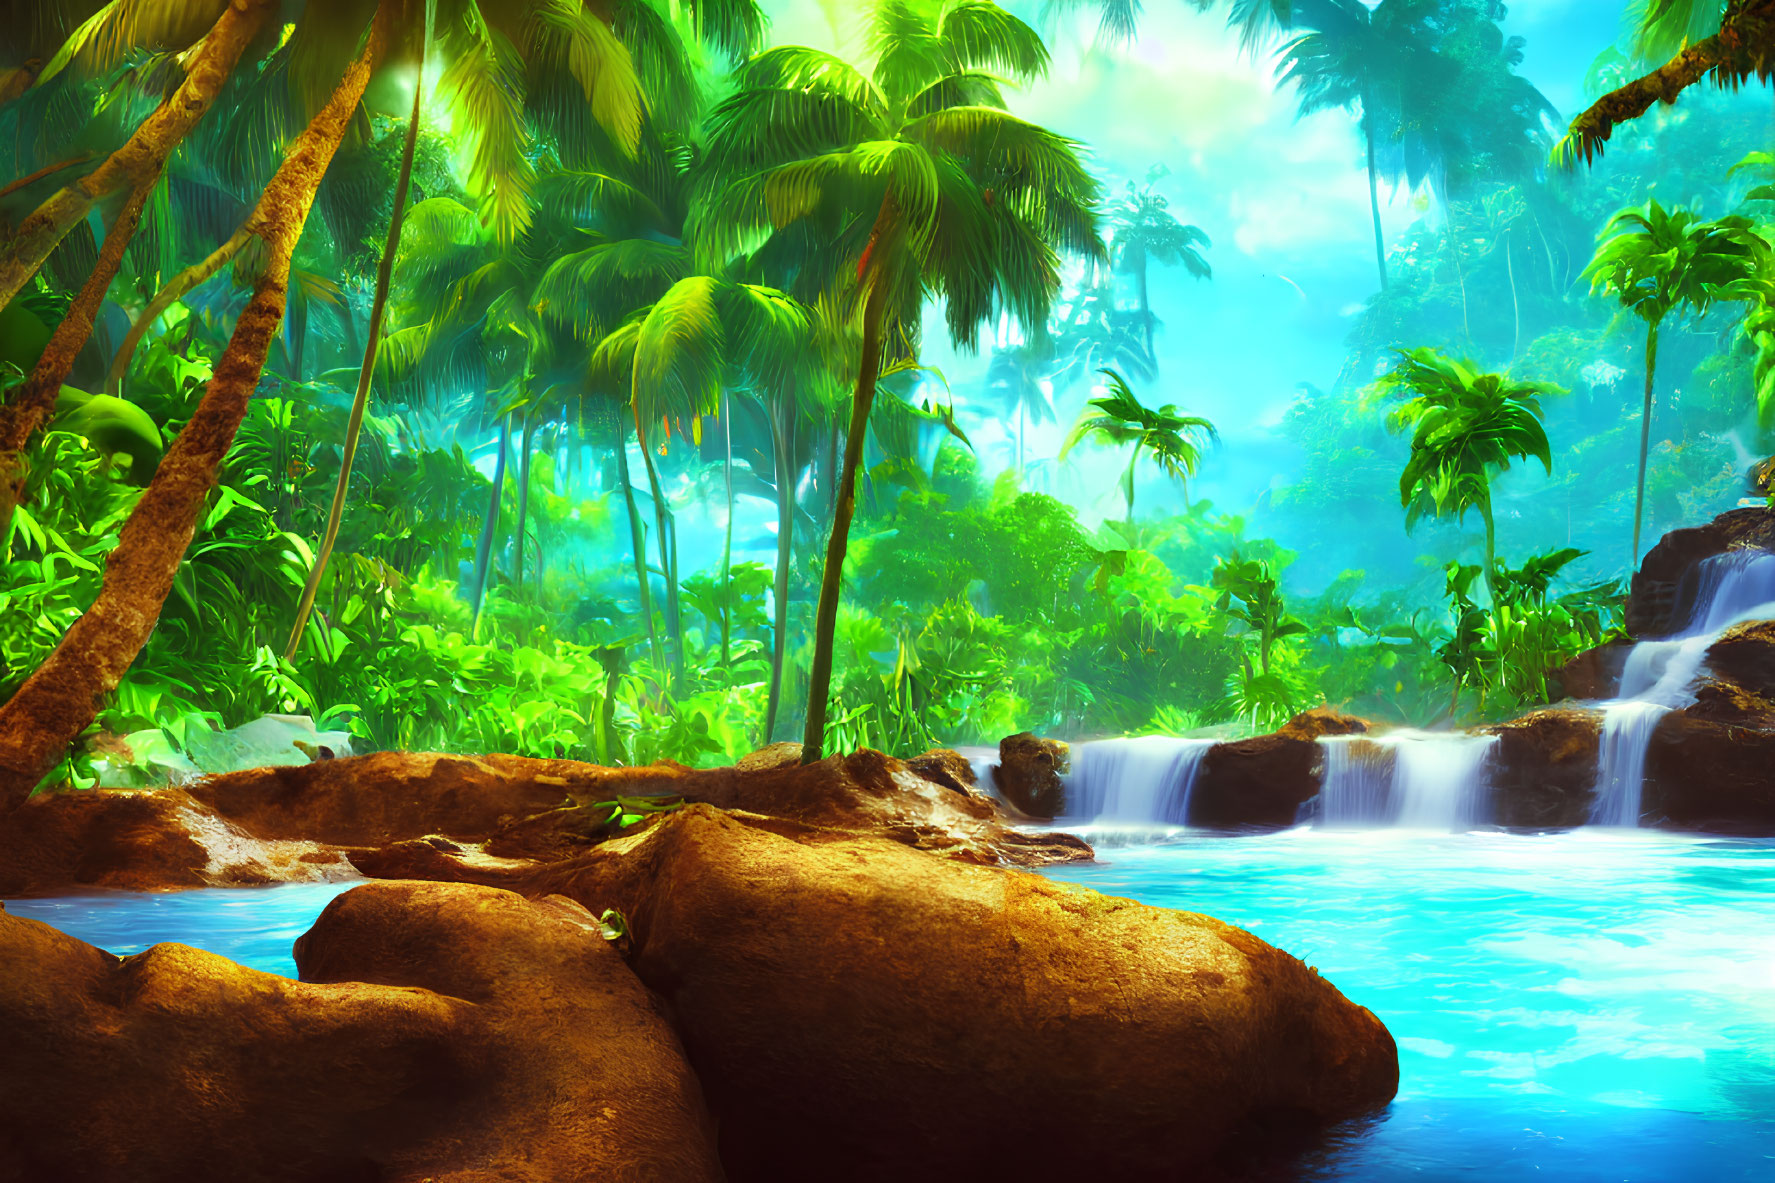 Tropical jungle scene with waterfall and blue pool